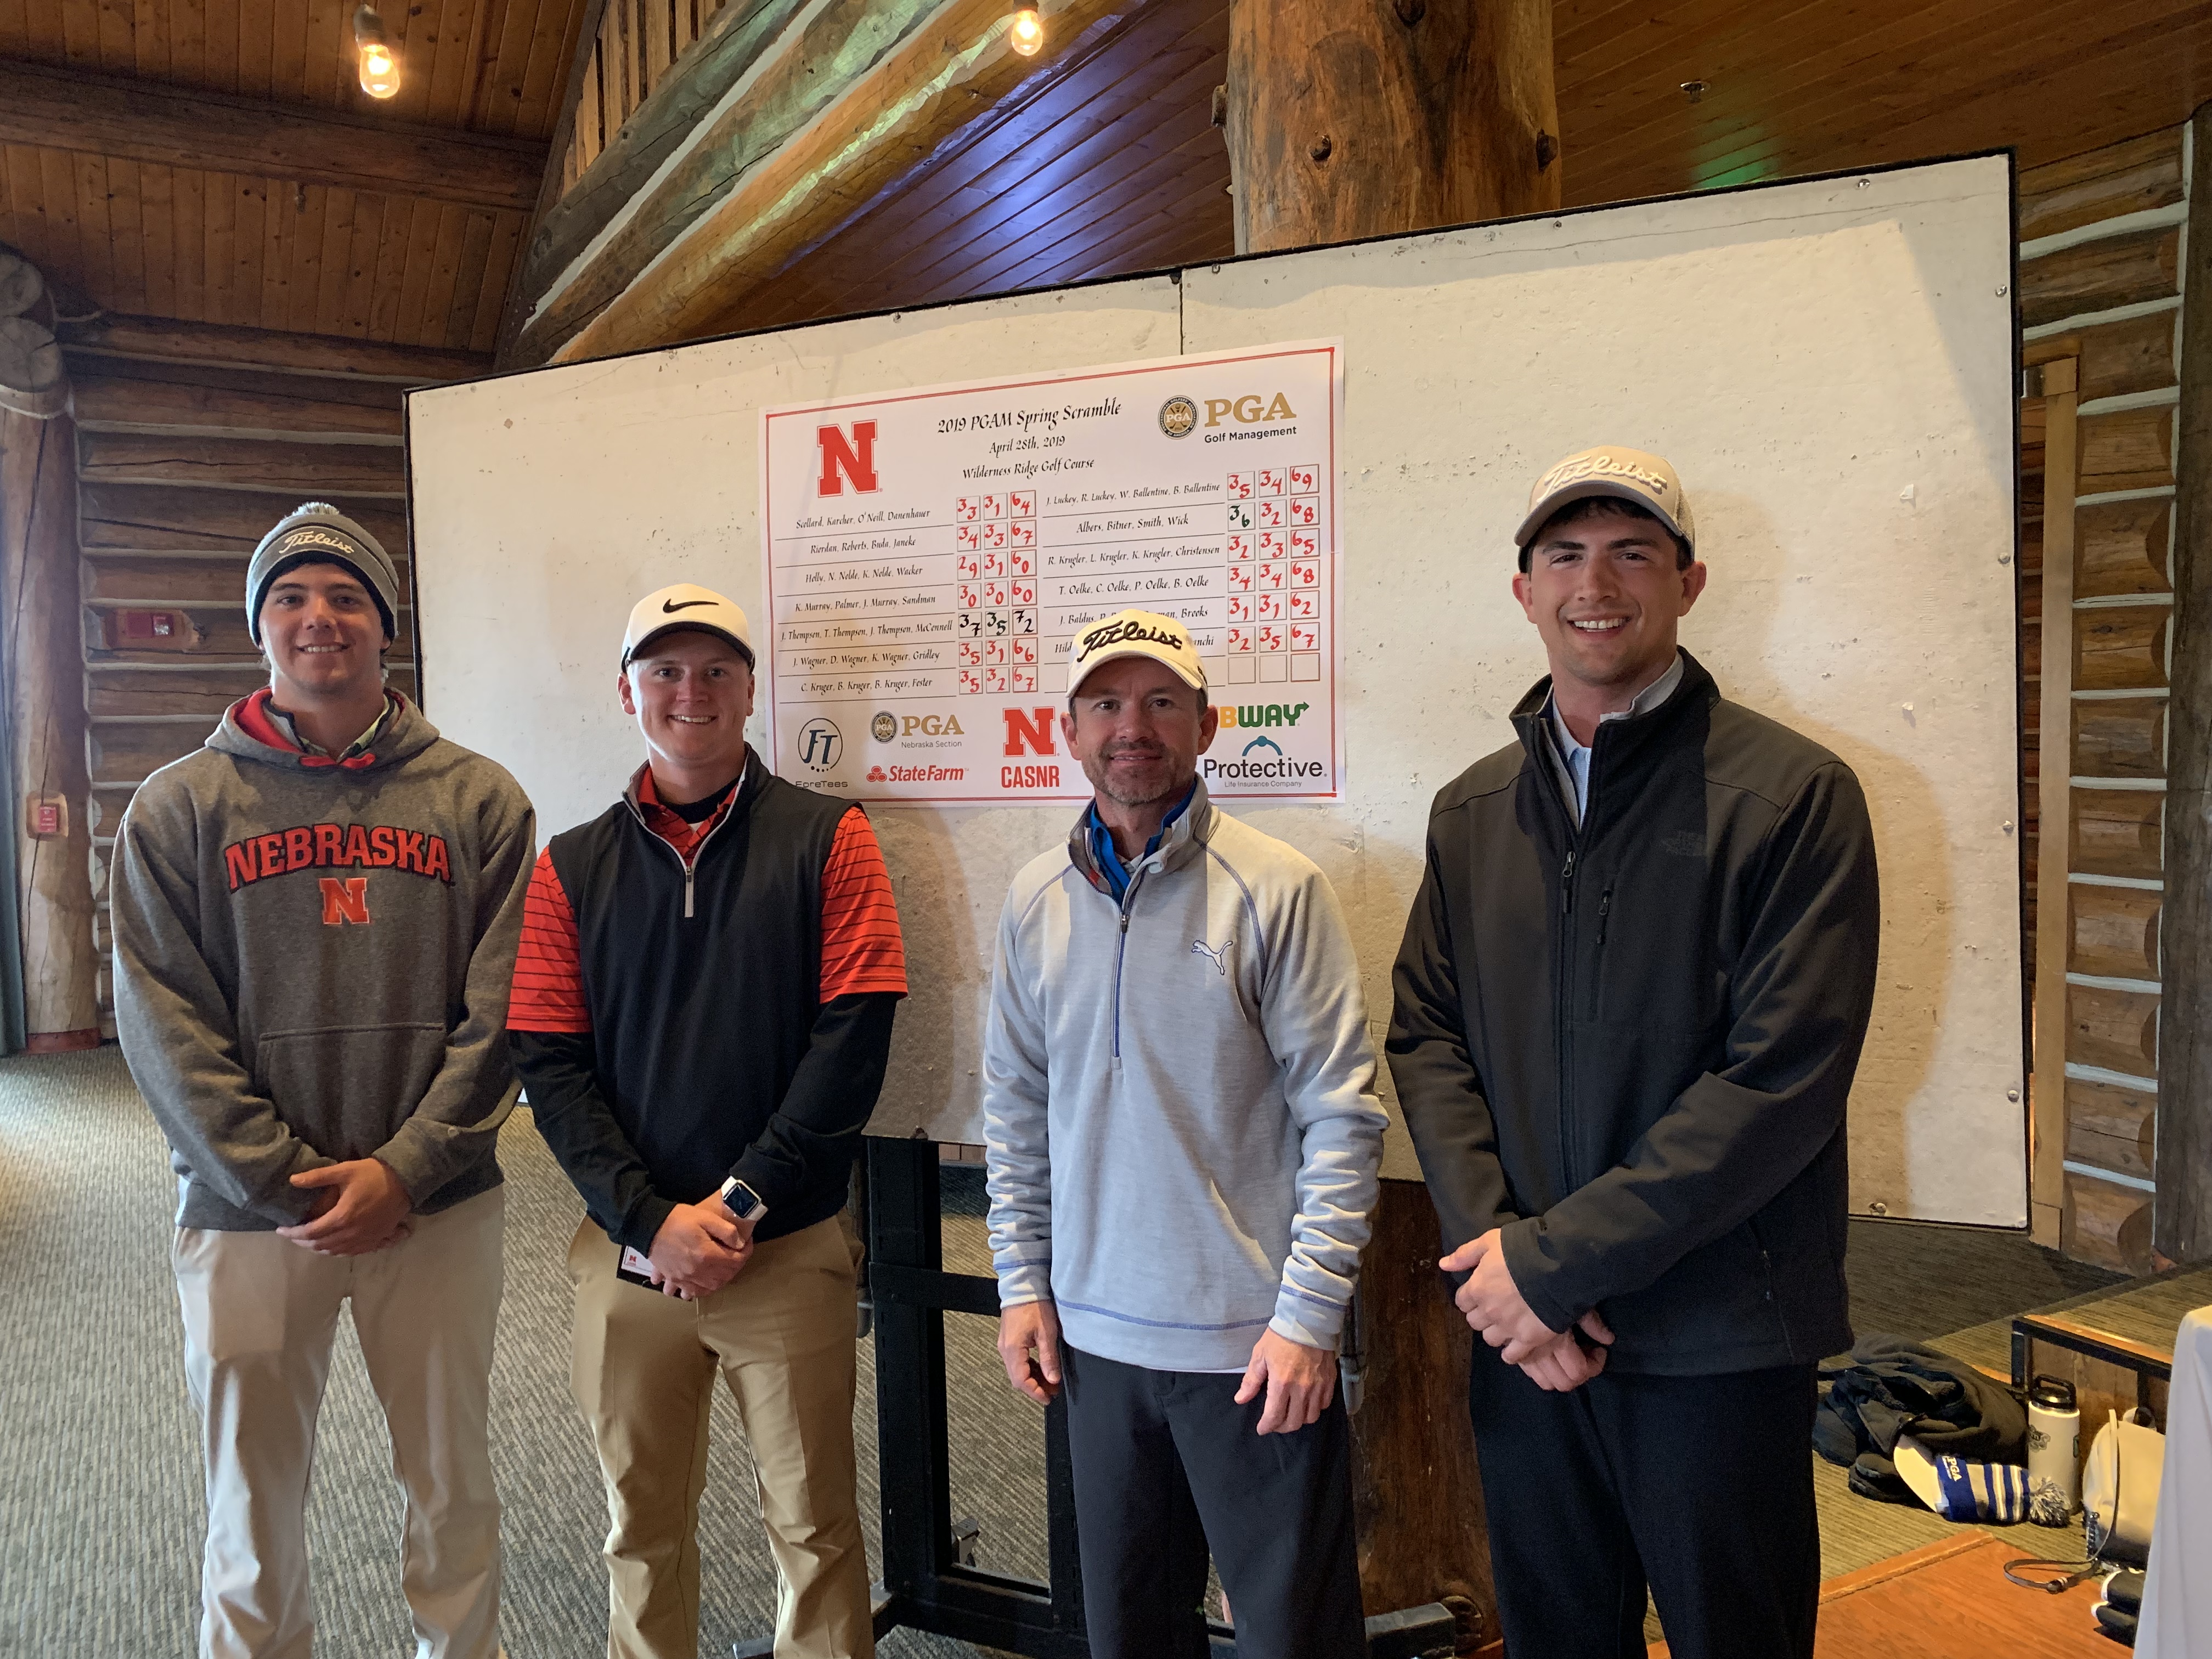 The Team of Palmer, Murray, Murray, and Sandman were victorious for the 2019 Spring Scramble with a Score of 60 on Sunday